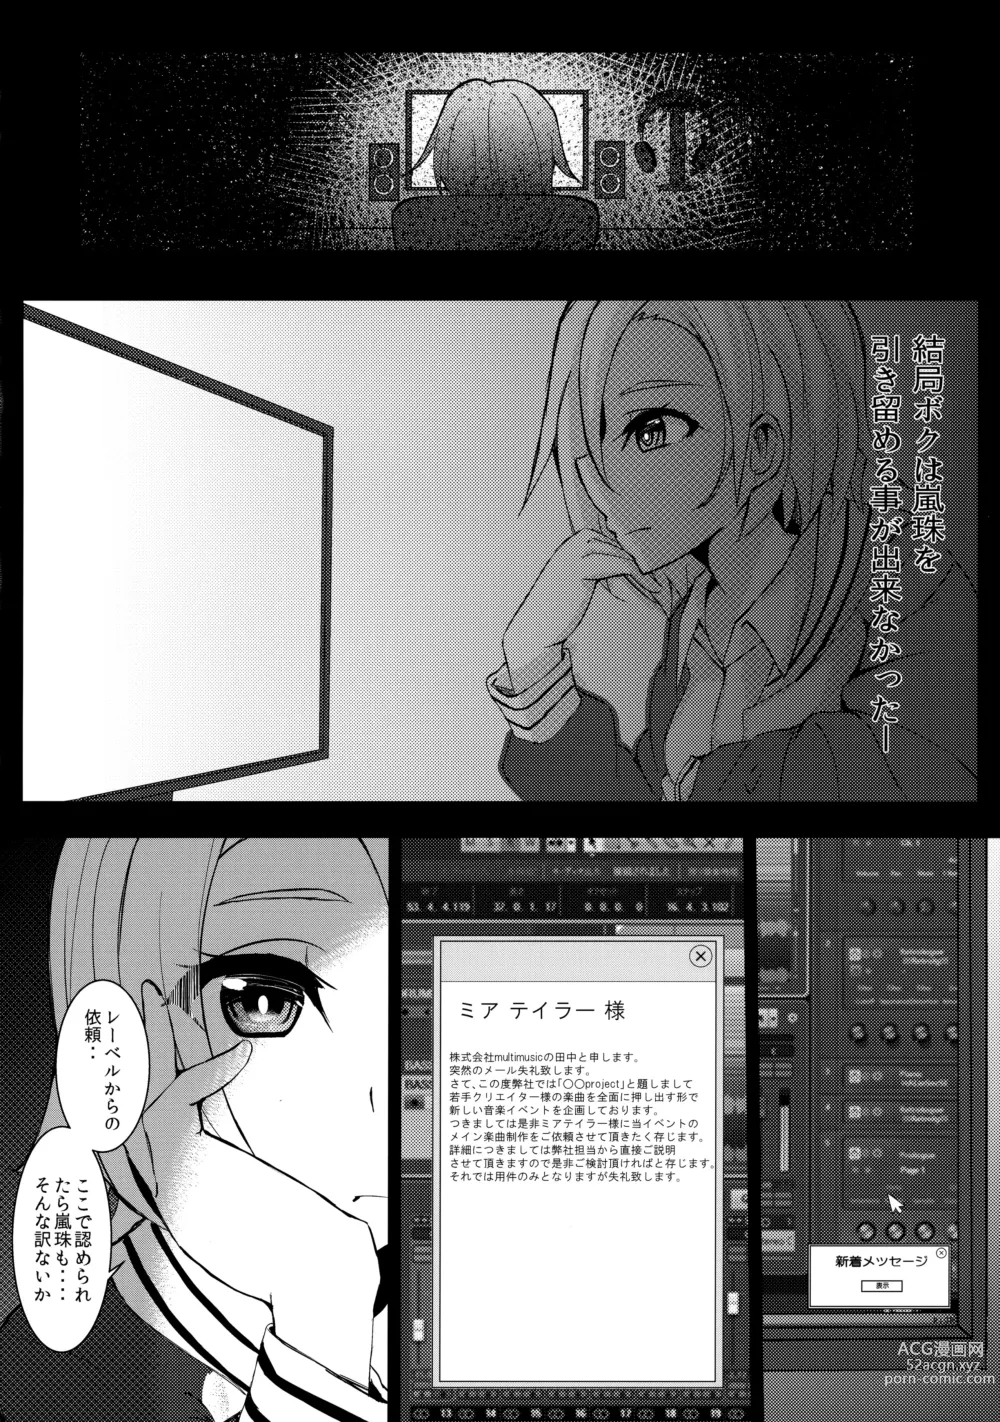 Page 3 of doujinshi miserable doll